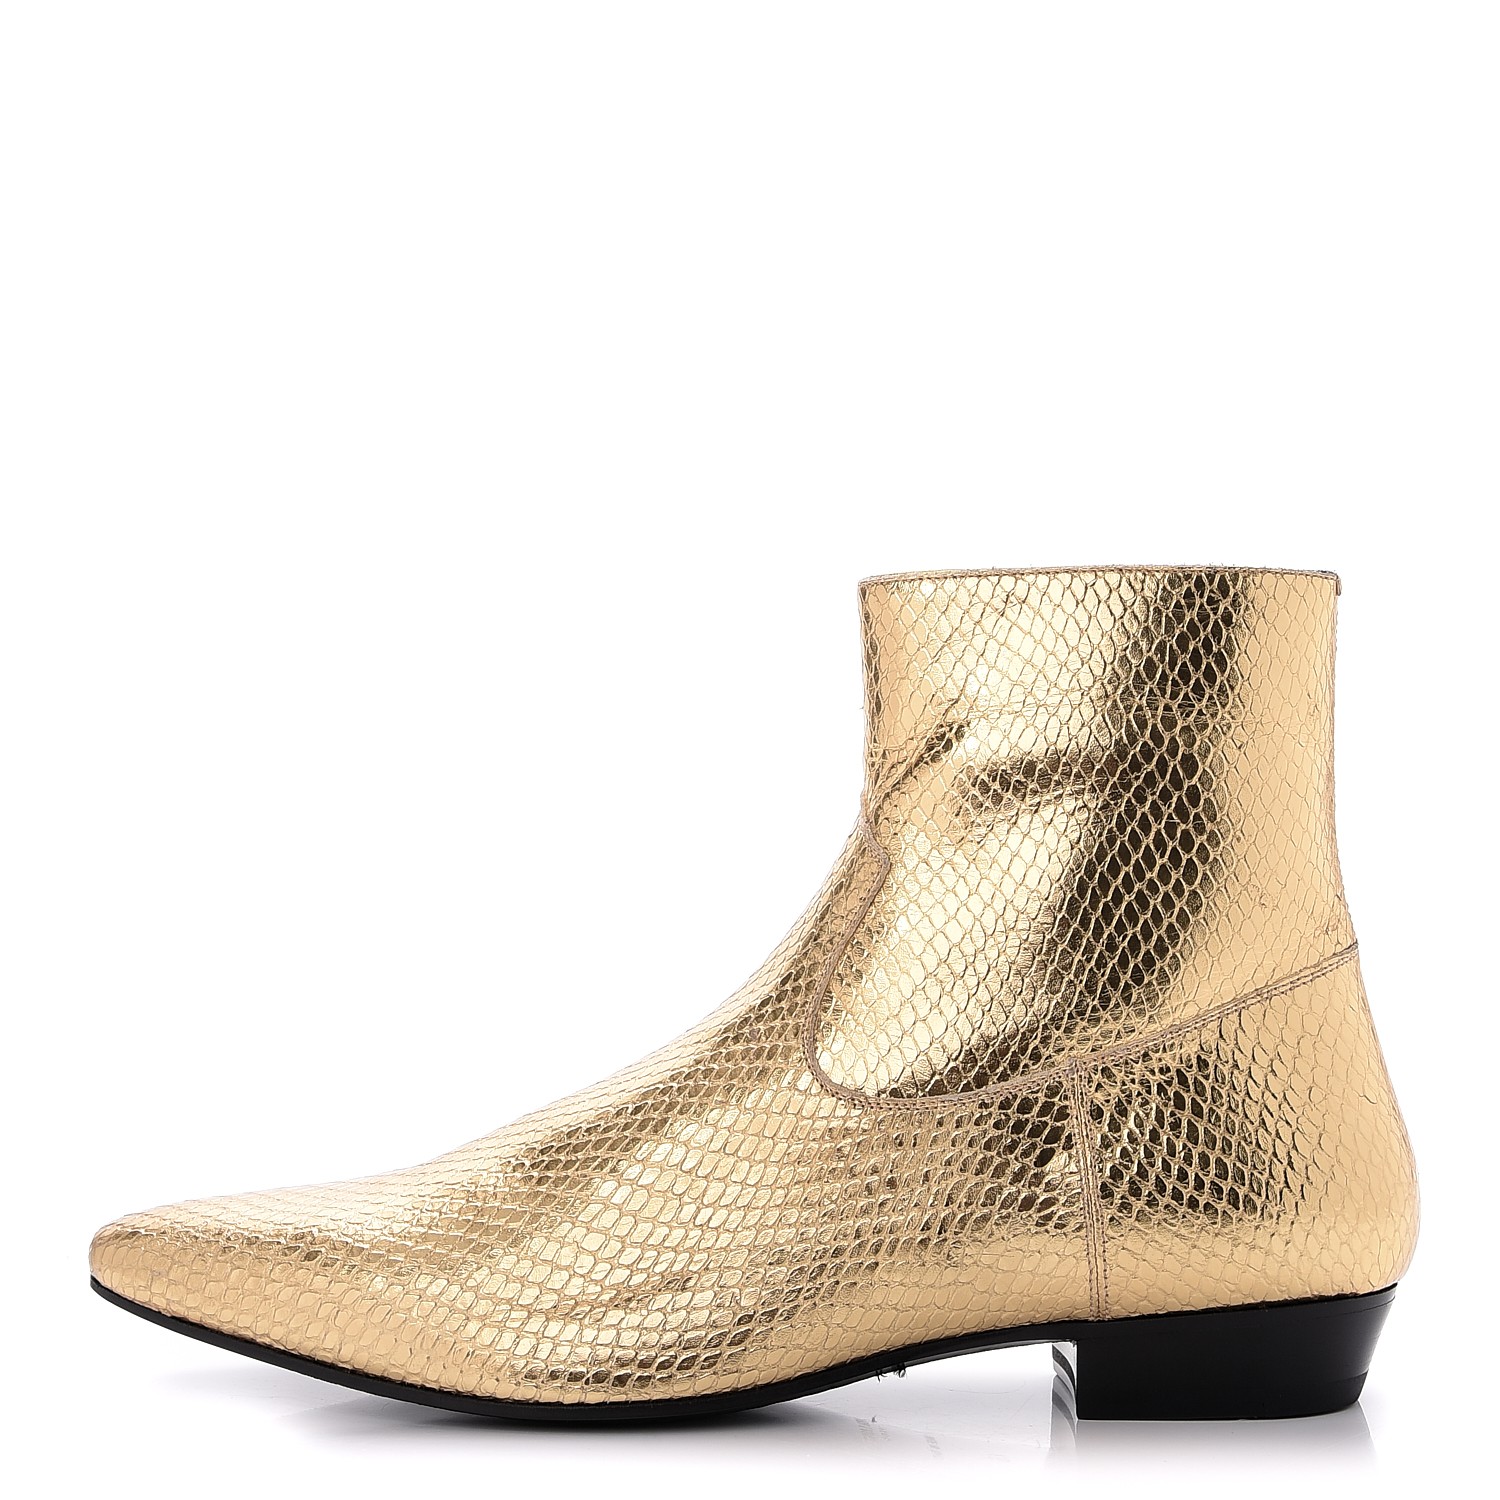 ysl gold boots